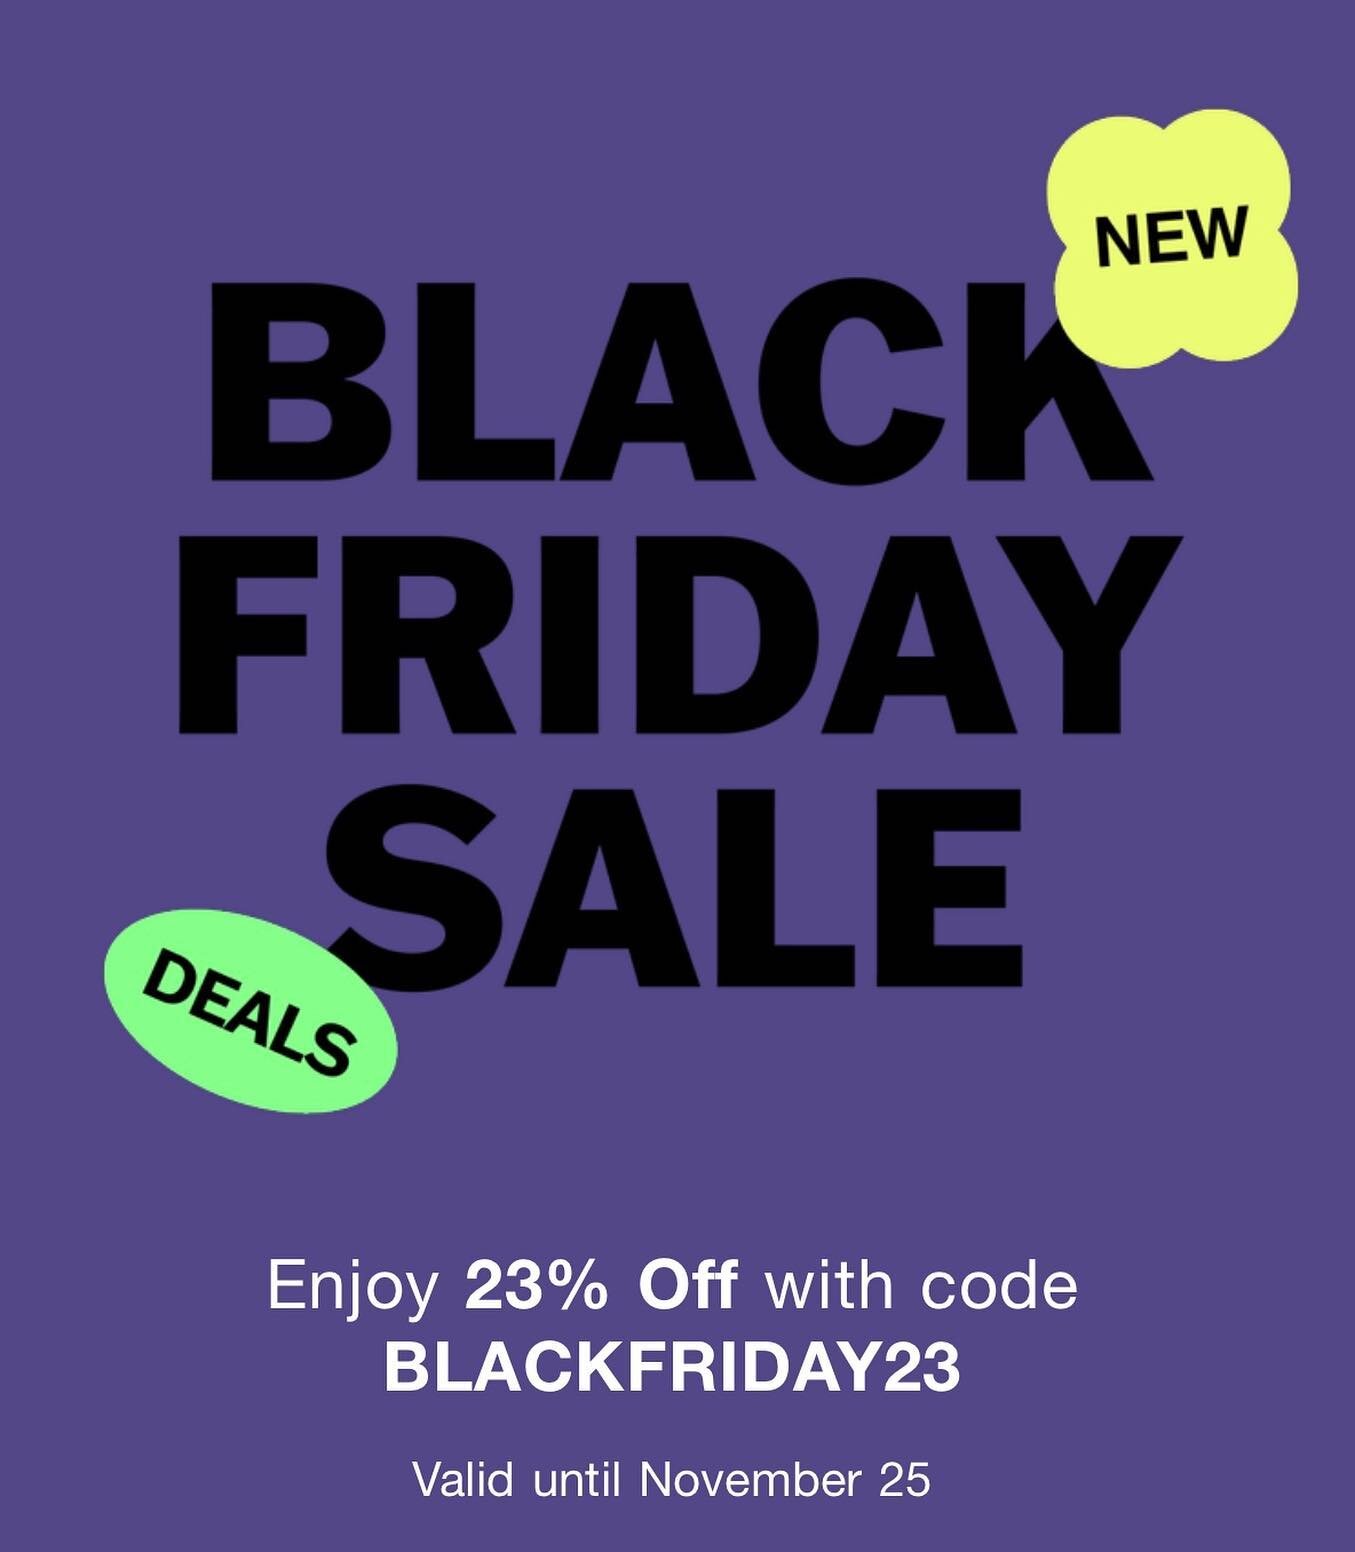 Come shop our Black Friday Sale today, or tomorrow on Small Business Saturday! Not local to us? No problem, use the code BLACKFRIDAY23 at checkout online! 🖤 🛍️